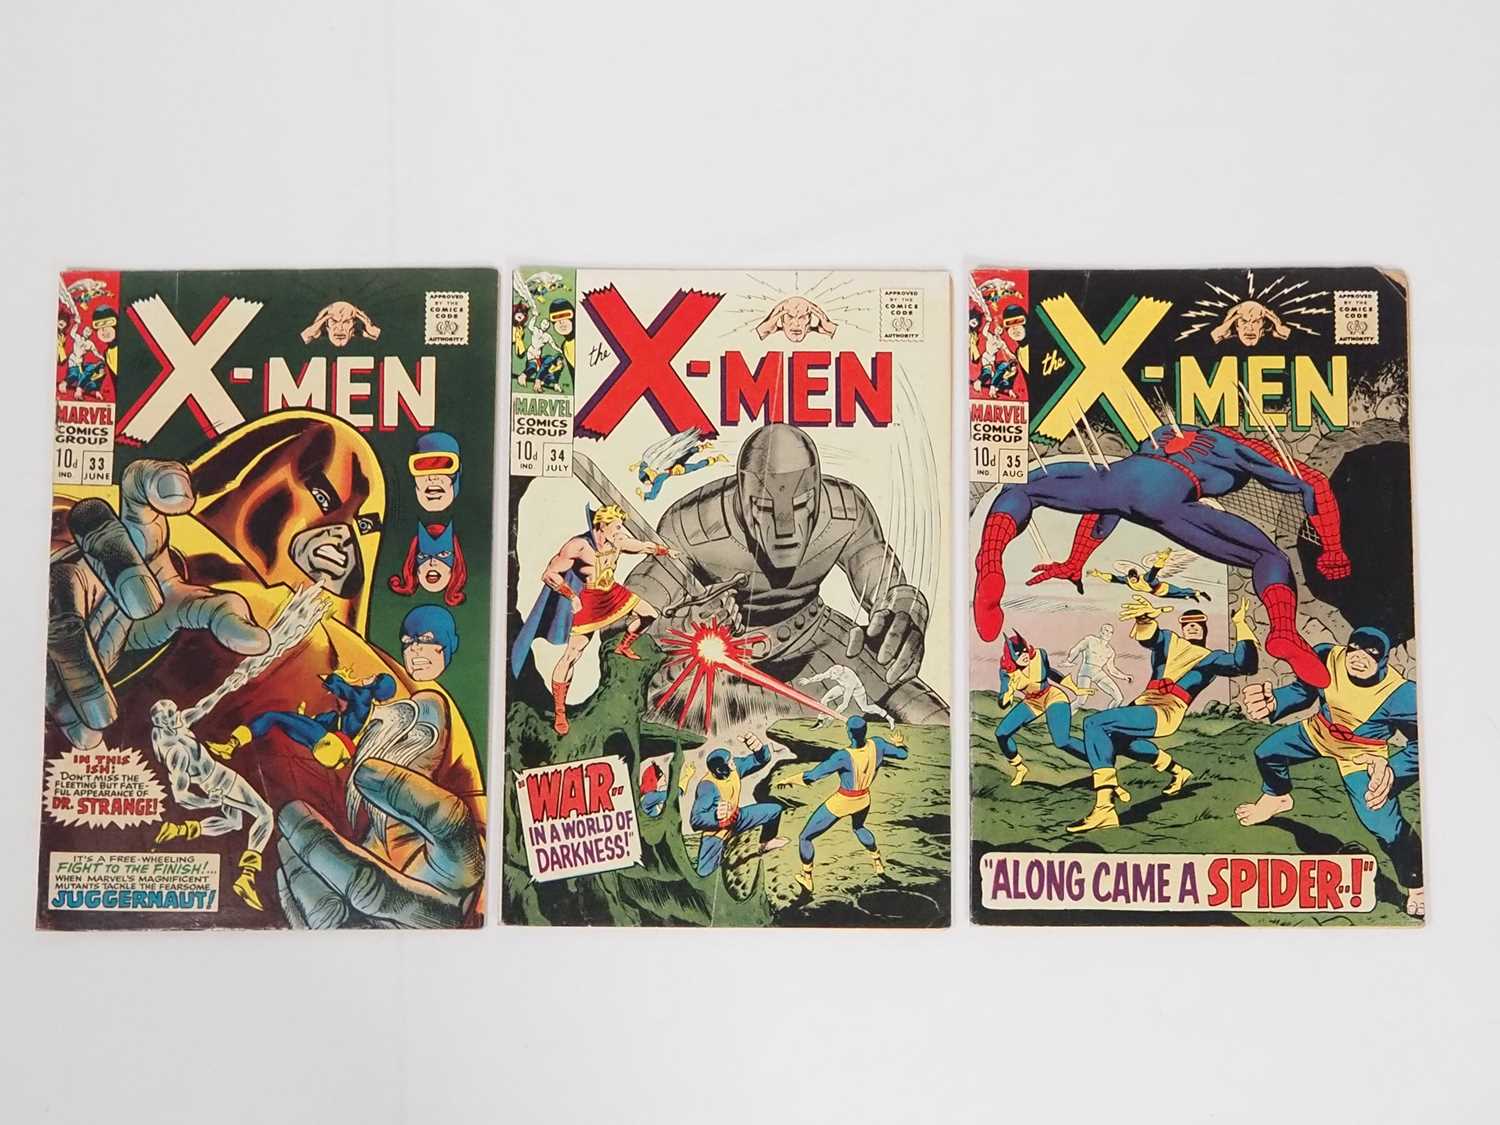 X-MEN #33, 34, 35 (3 in Lot) - (1967 - MARVEL - UK Price Variant) - Includes the first appearance of